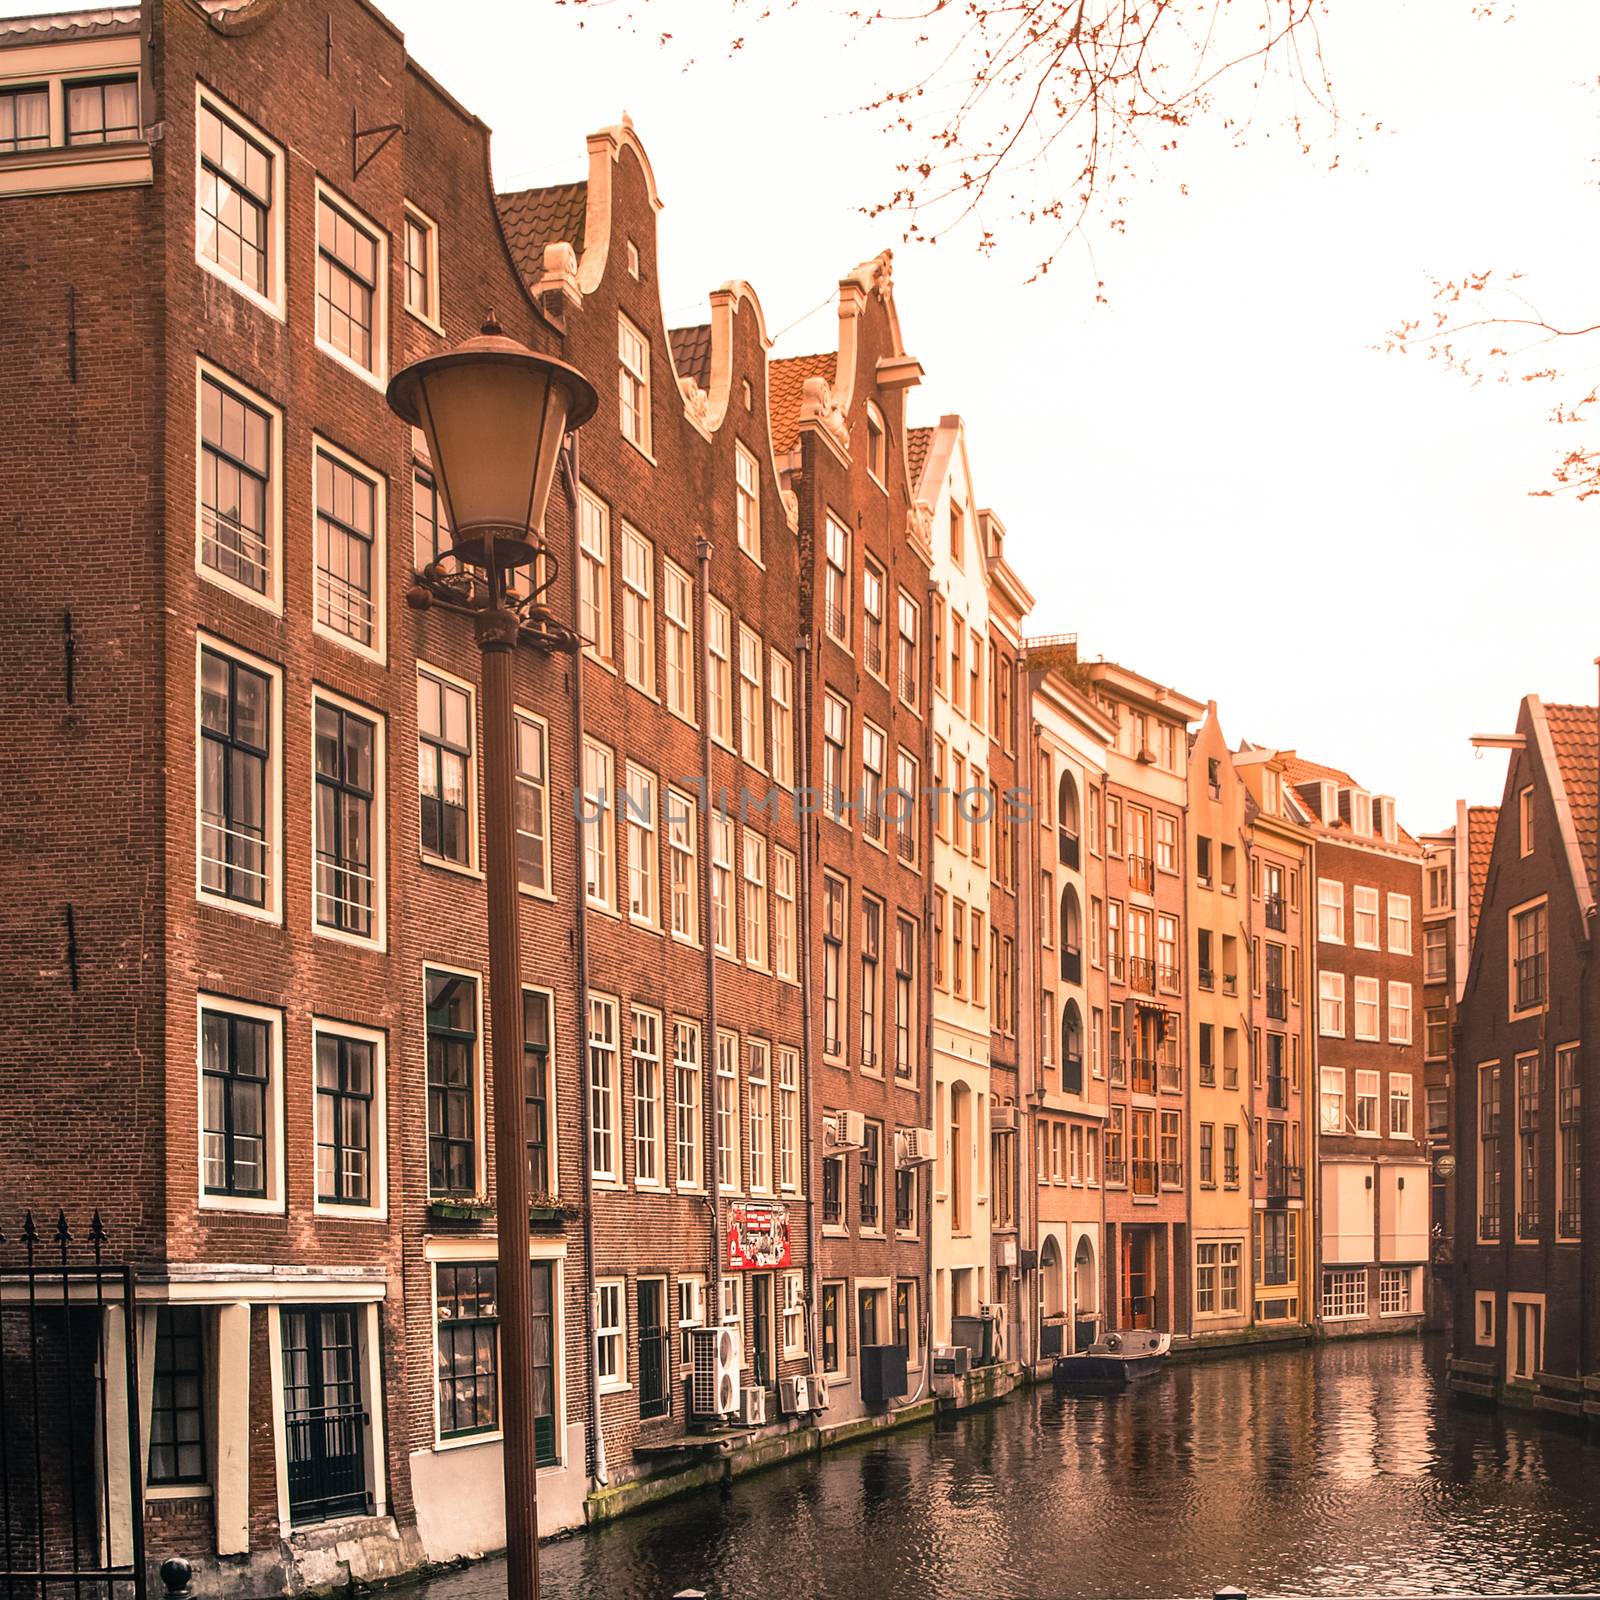 Amsterdam streets. View of narrow residential houses in historical city centre of Amsterdam, Netherlands by pyty